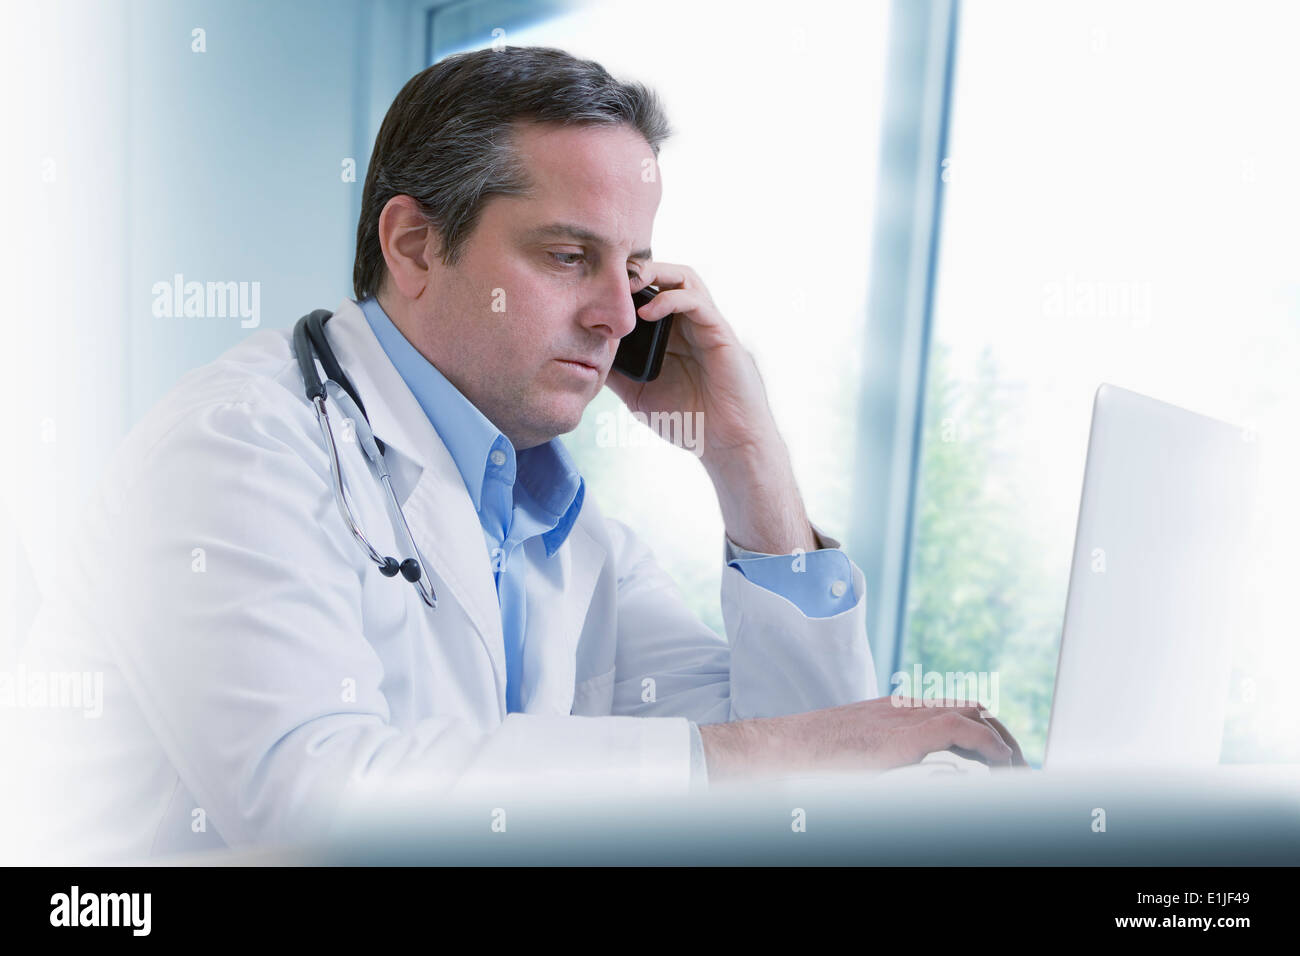 Doctor using mobile phone Stock Photo